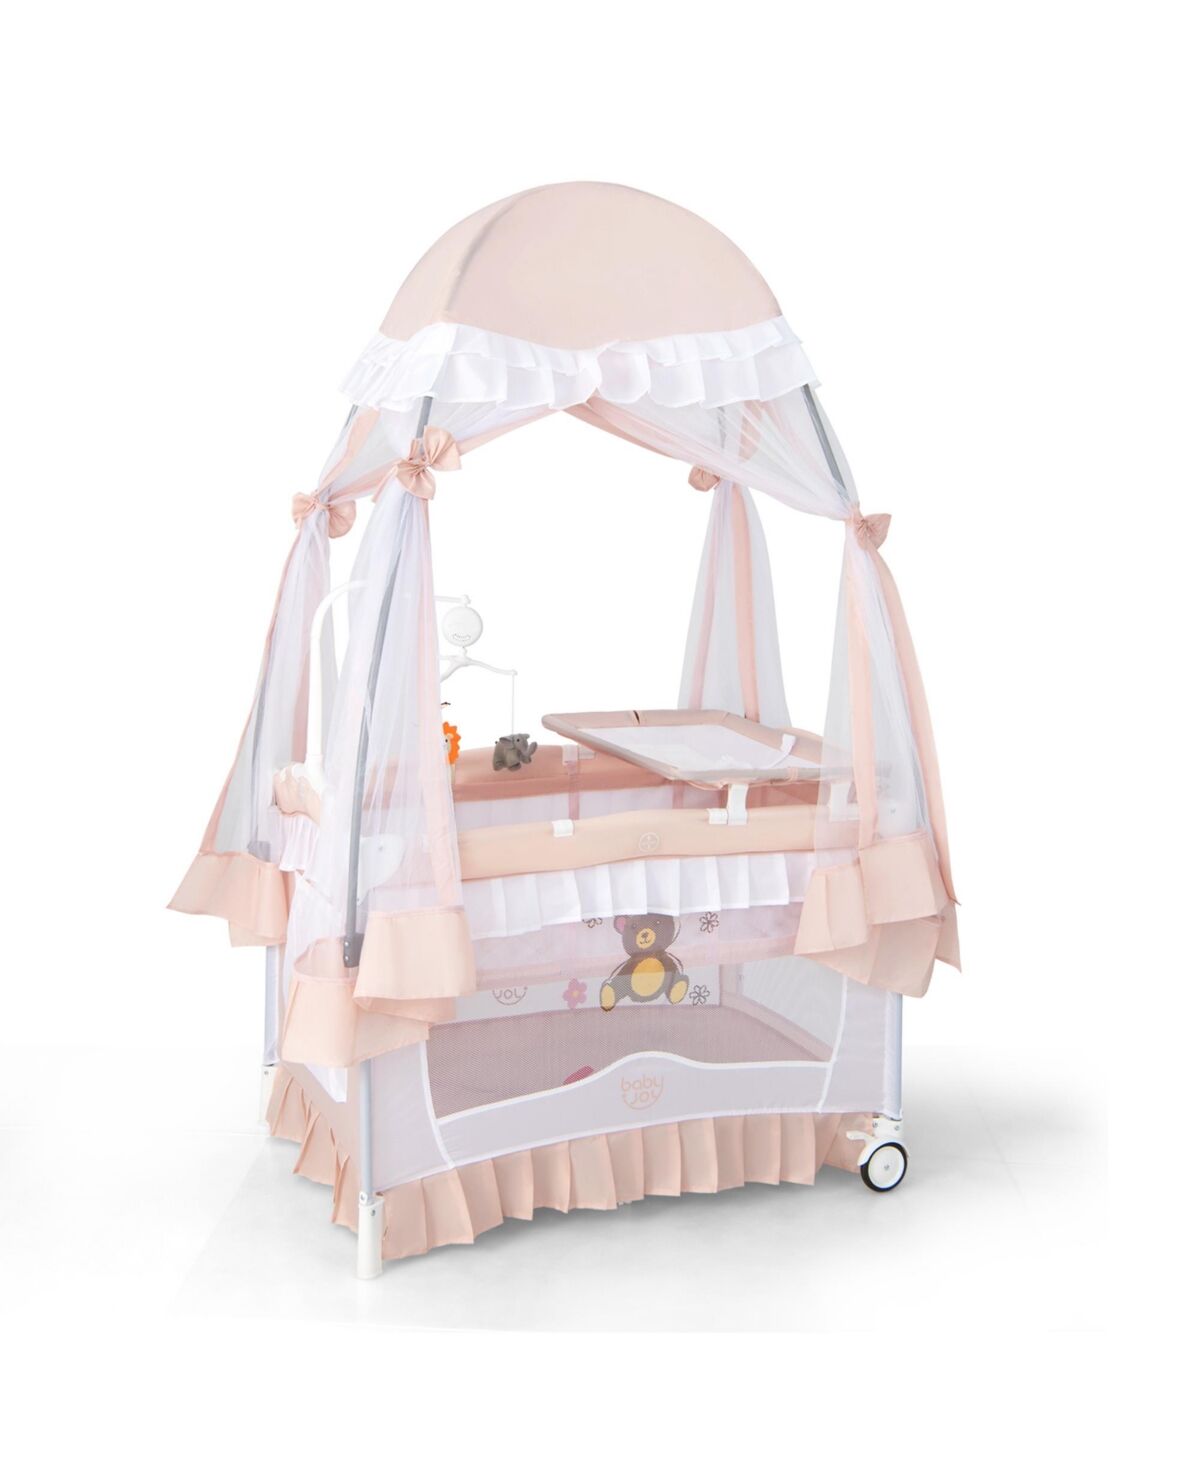 Costway Portable Baby Playpen Crib Cradle Bassinet Changing Pad Mosquito Net Toys w Bag - Ligth pink